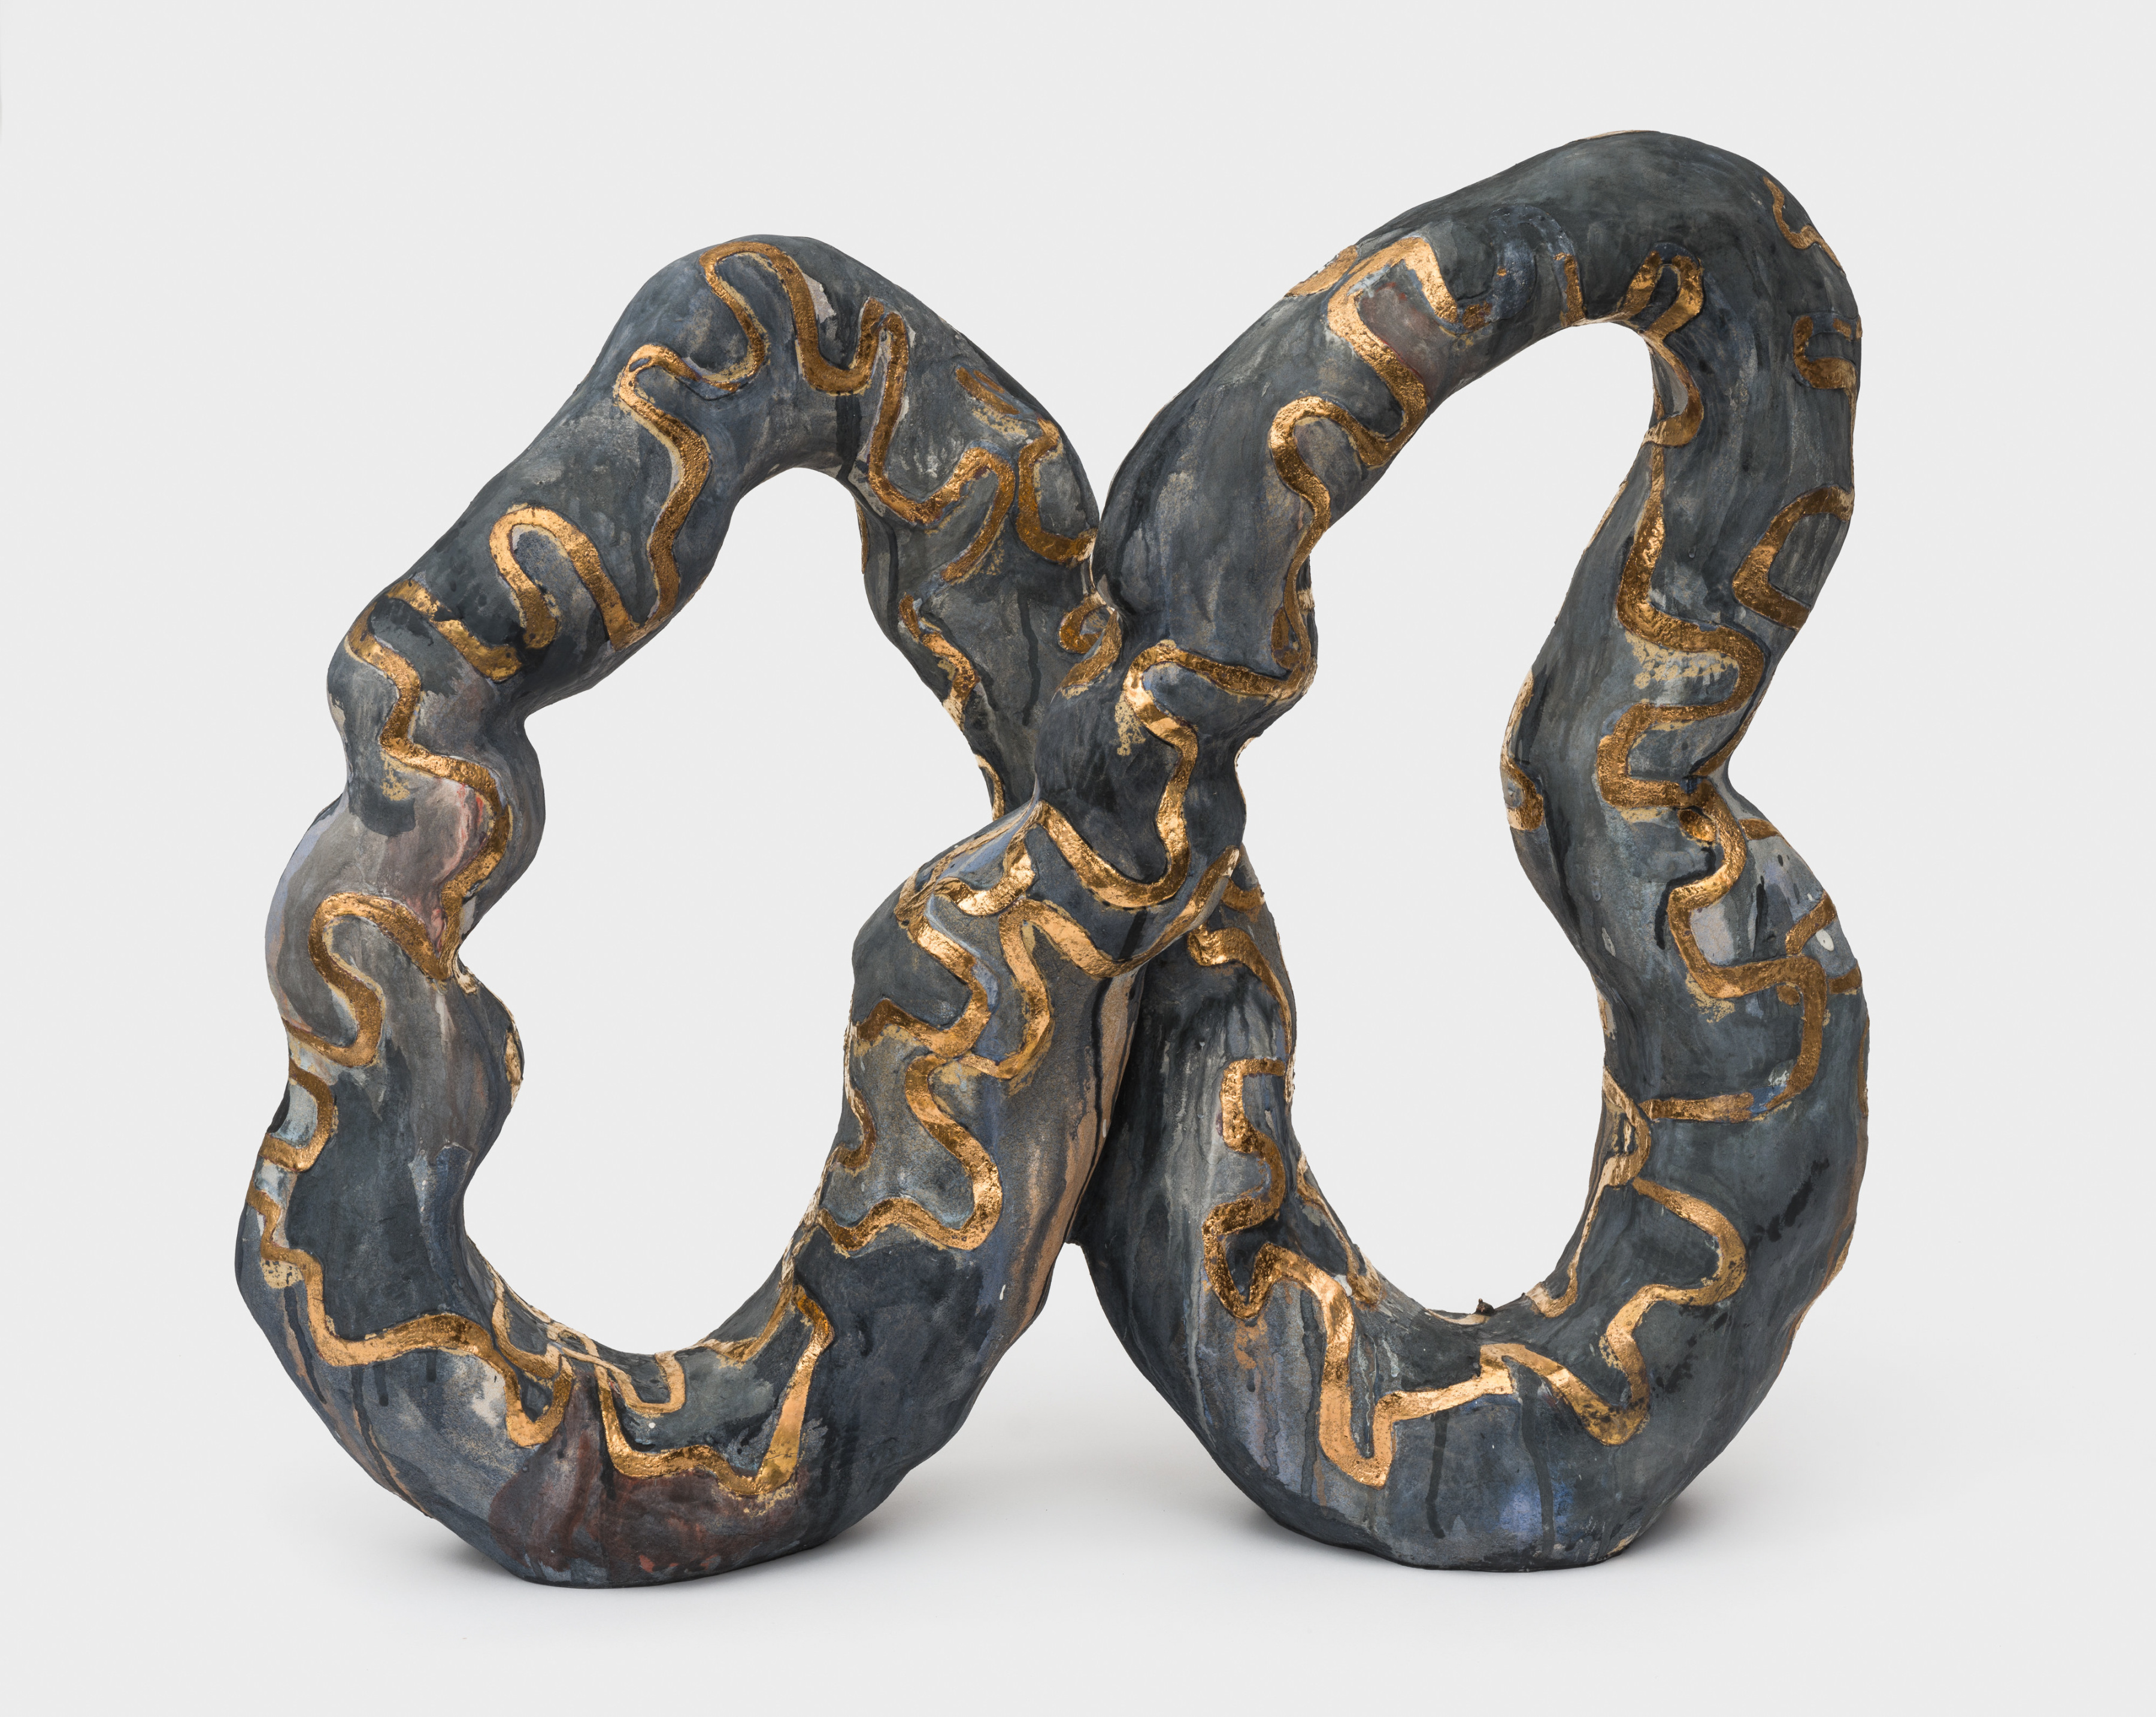 A dark grey glazed ceramic sculpture in the shape of an infinity symbol with golden details. 